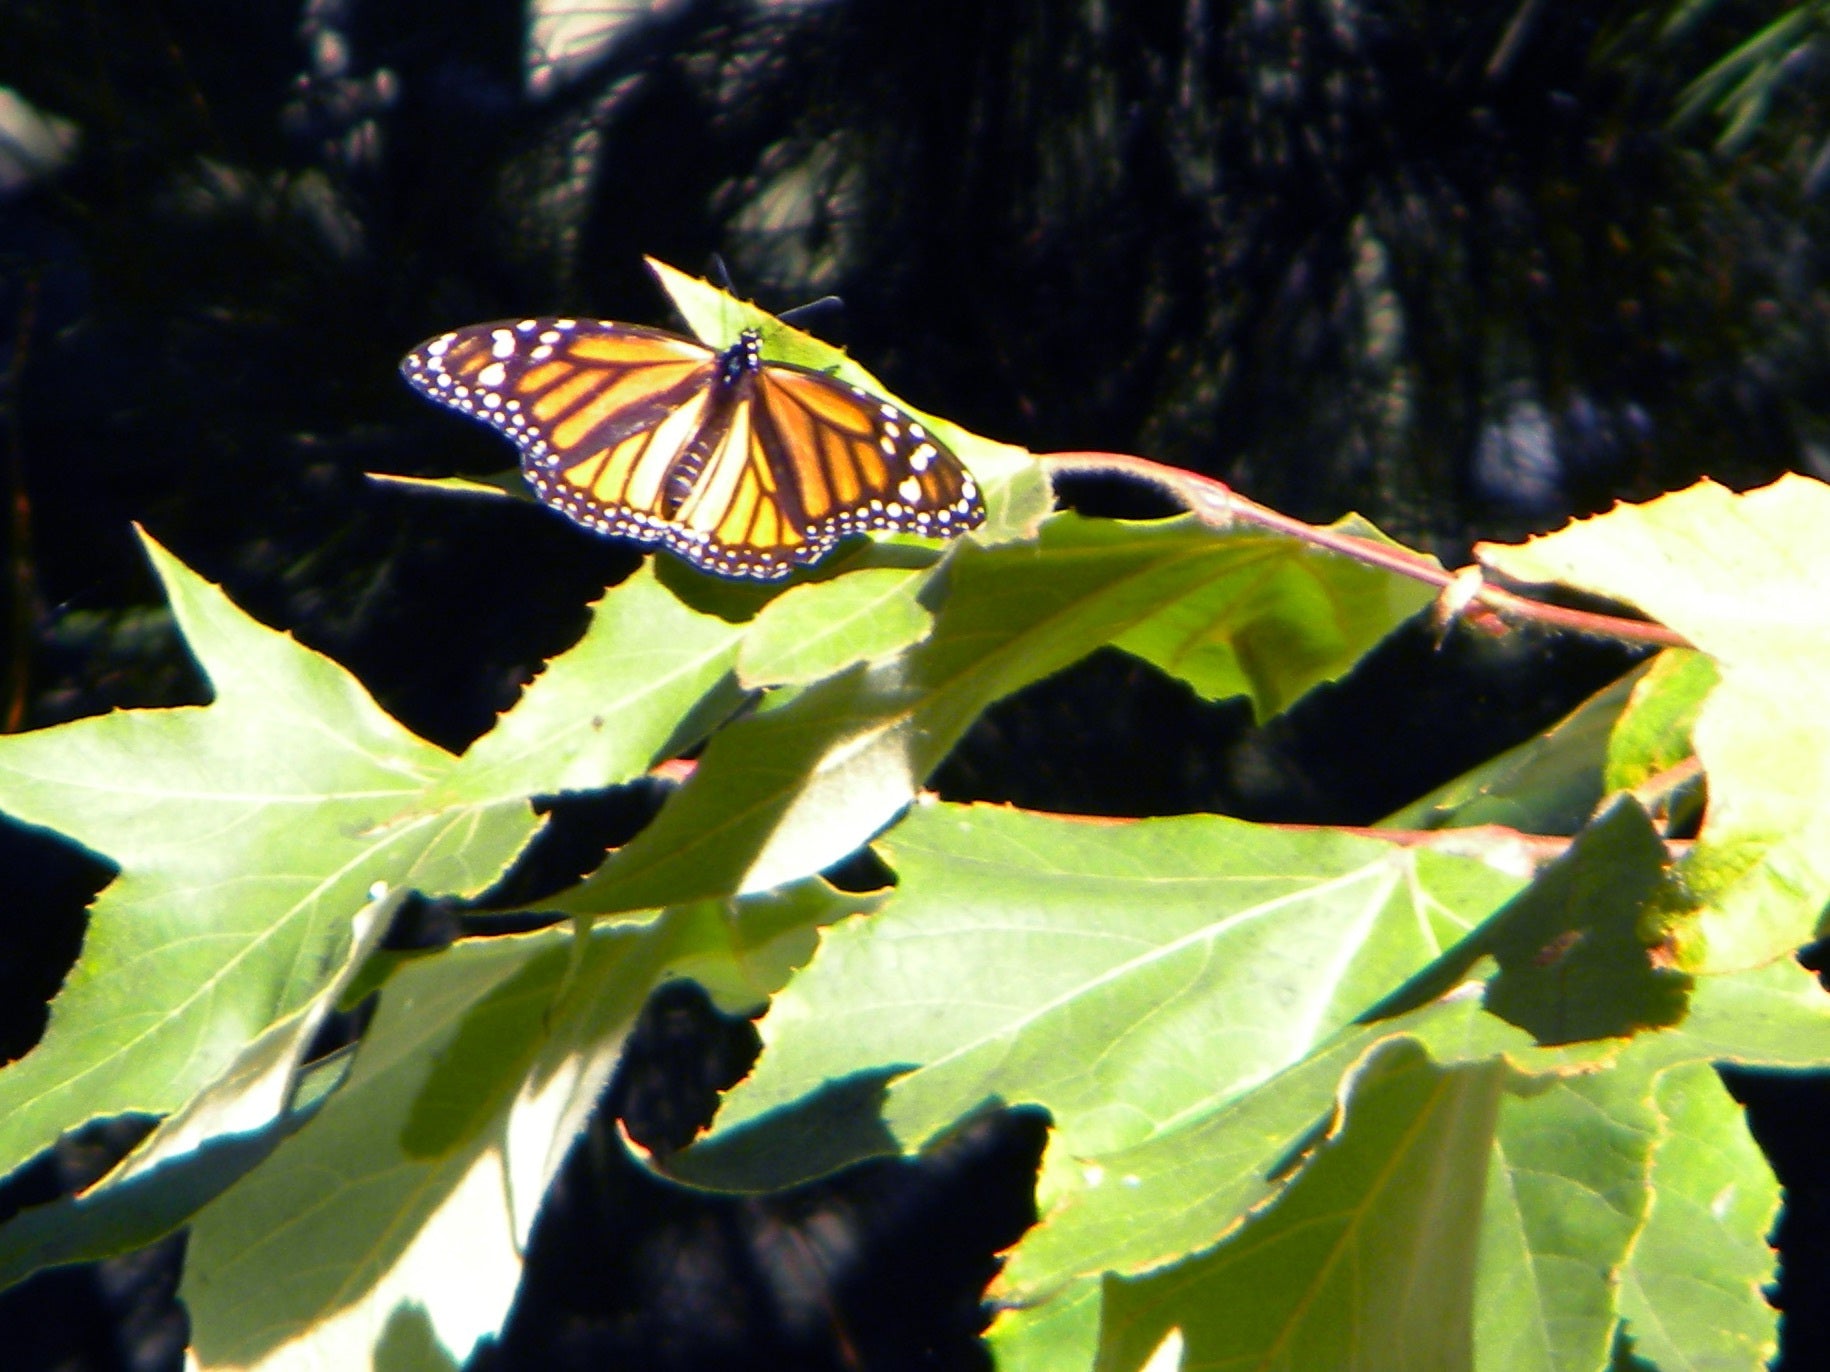 A monarch butterfly perched gracefully on a leaf, basking in sunlight amidst its migration. The contrasting colors of its wings stand out against the green foliage, highlighting the beauty of these creatures on their annual journey.